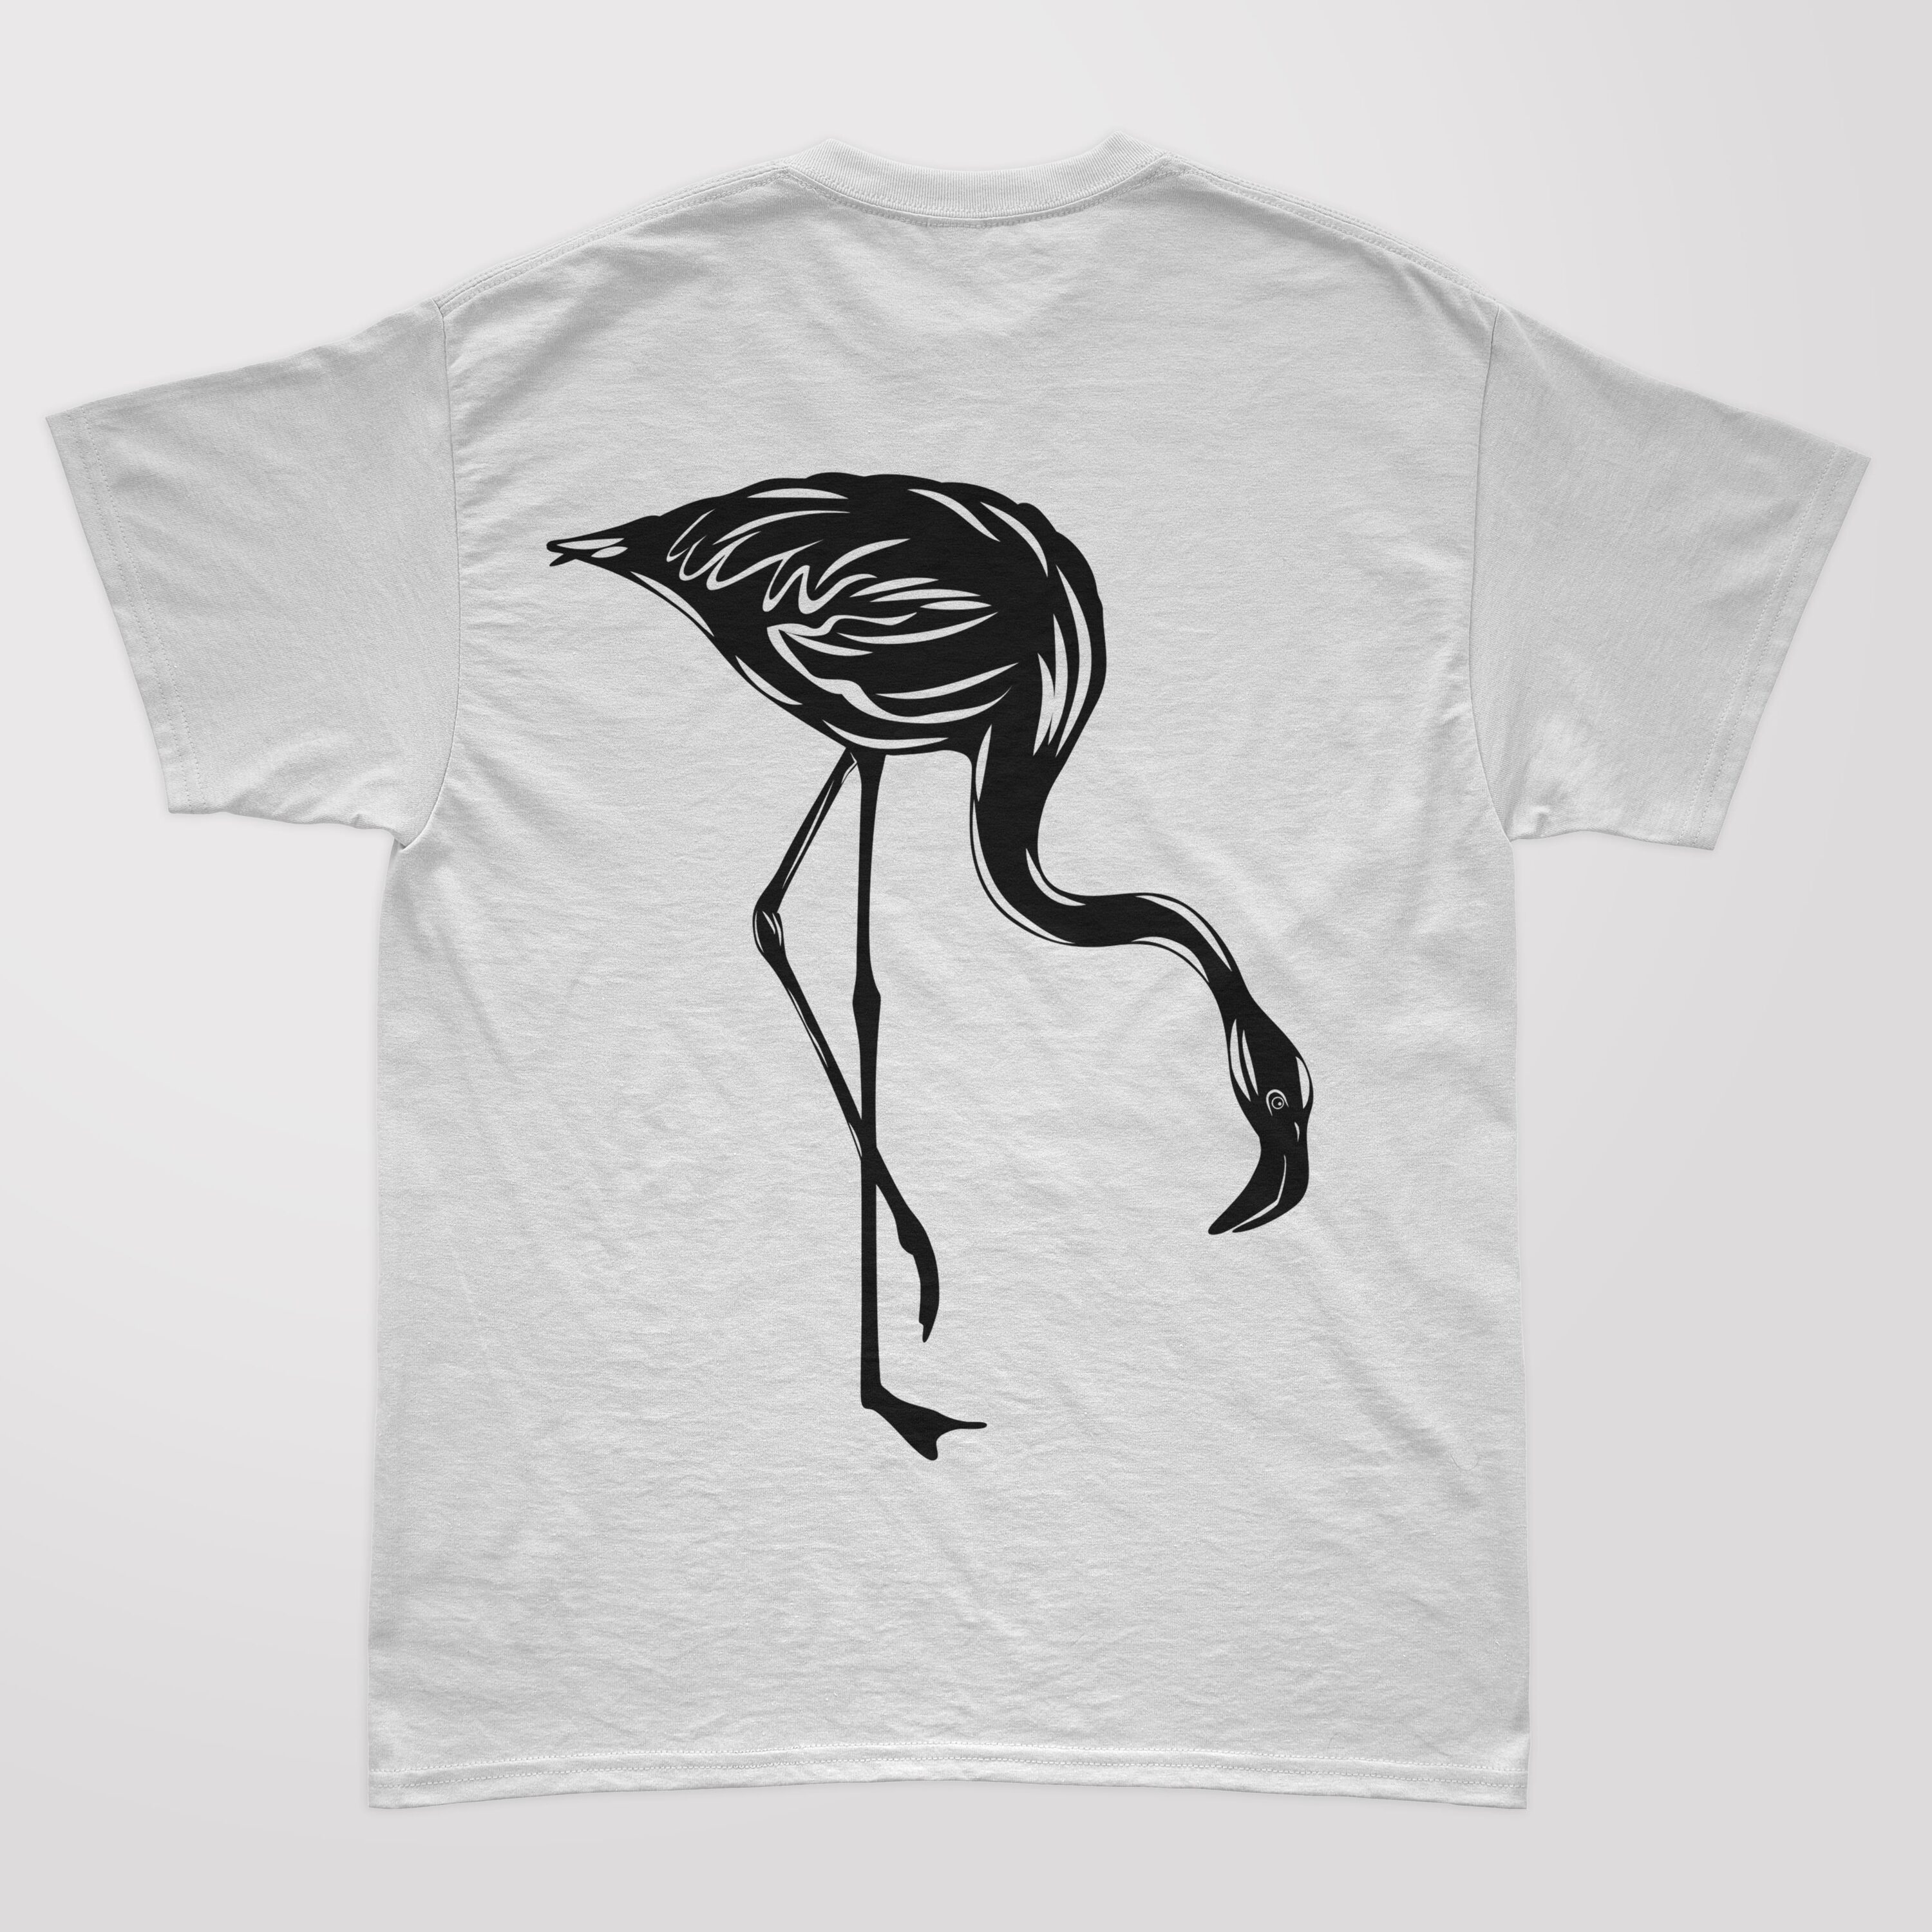 Classic flamingo in the silhouette style.